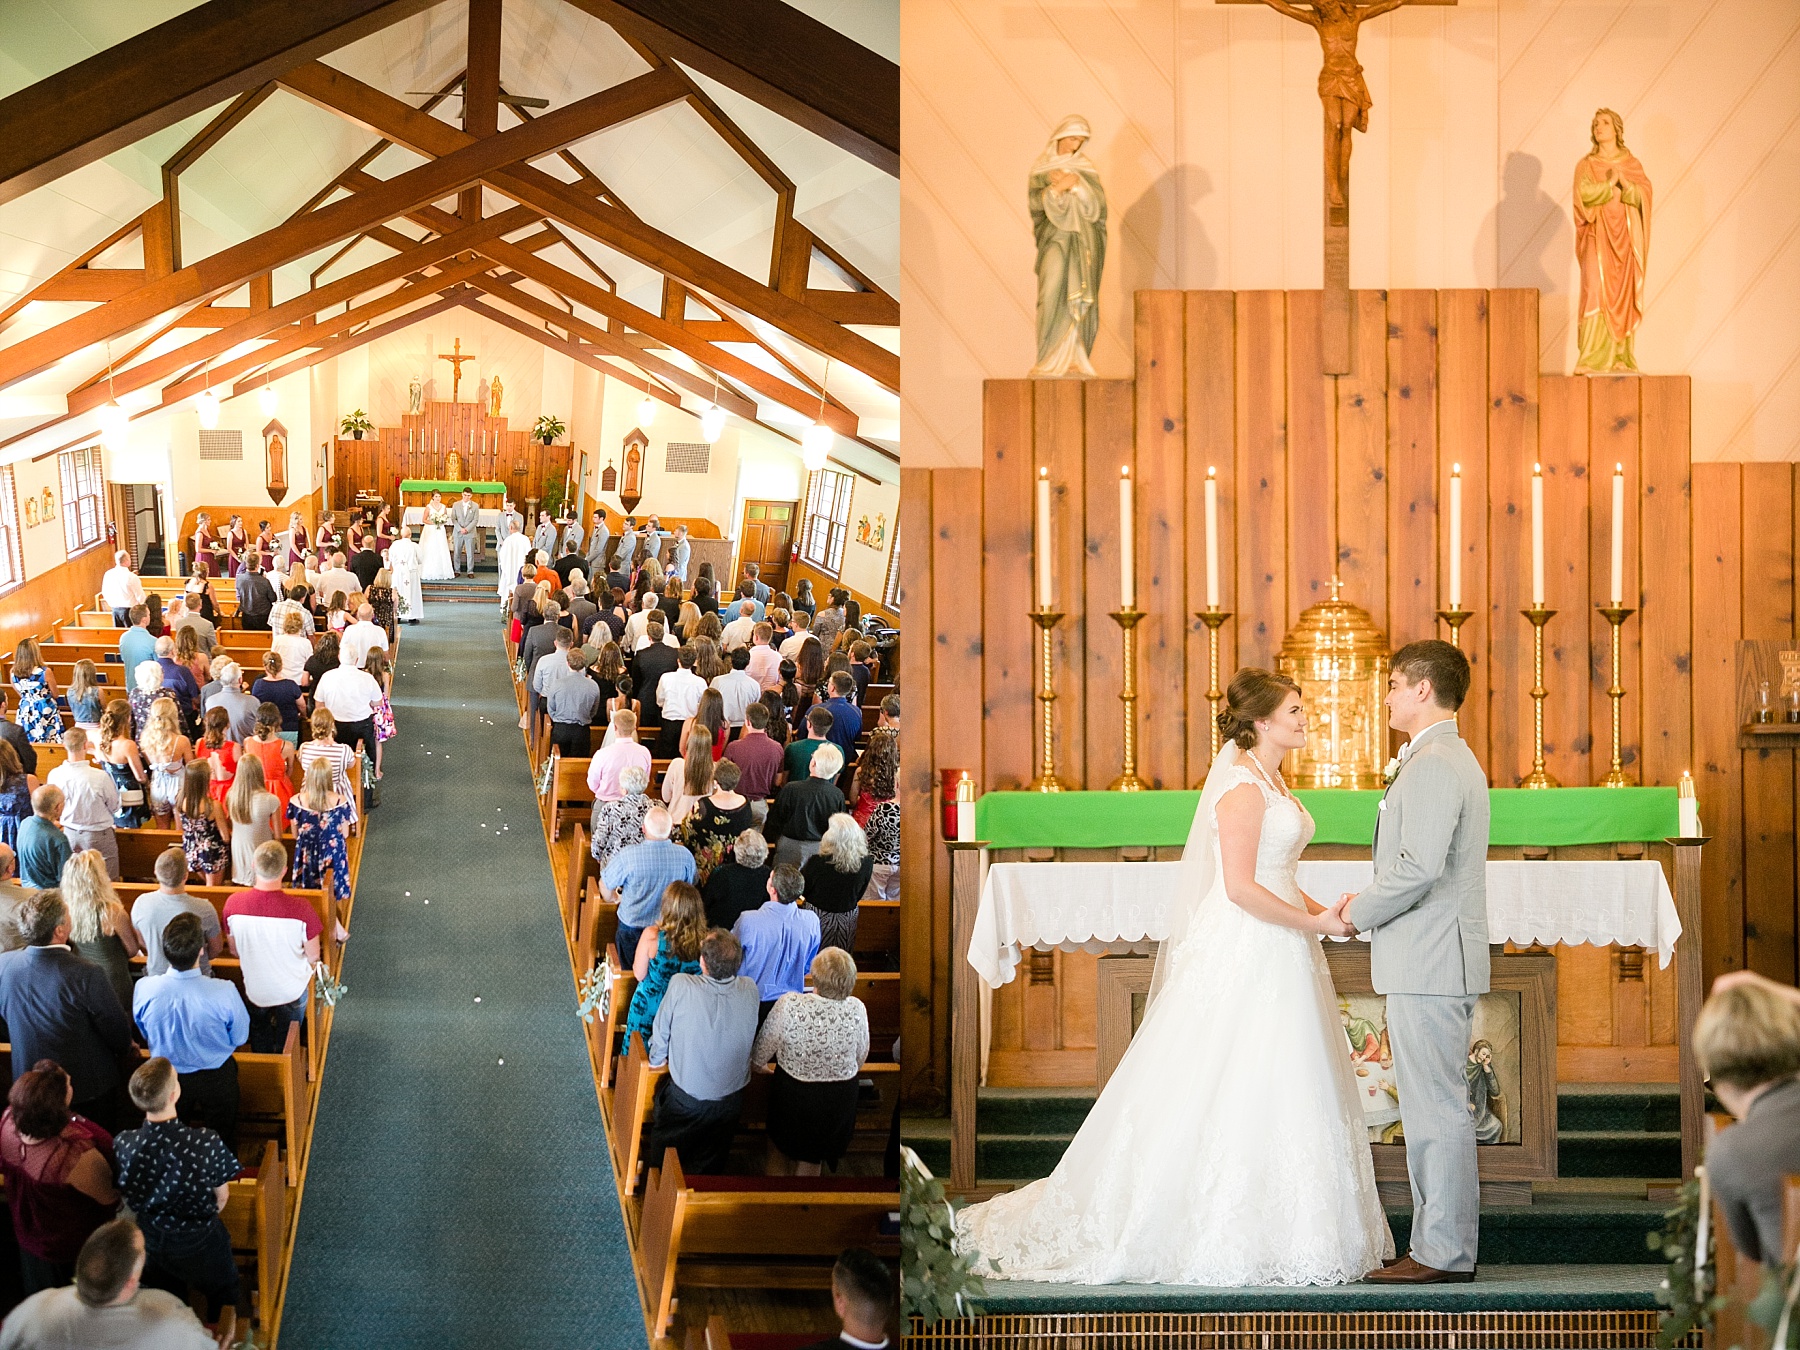 Married at the church between their hometowns at St. Anthony de Padua, and they danced the night away at their Paradise Shores 4 wedding.